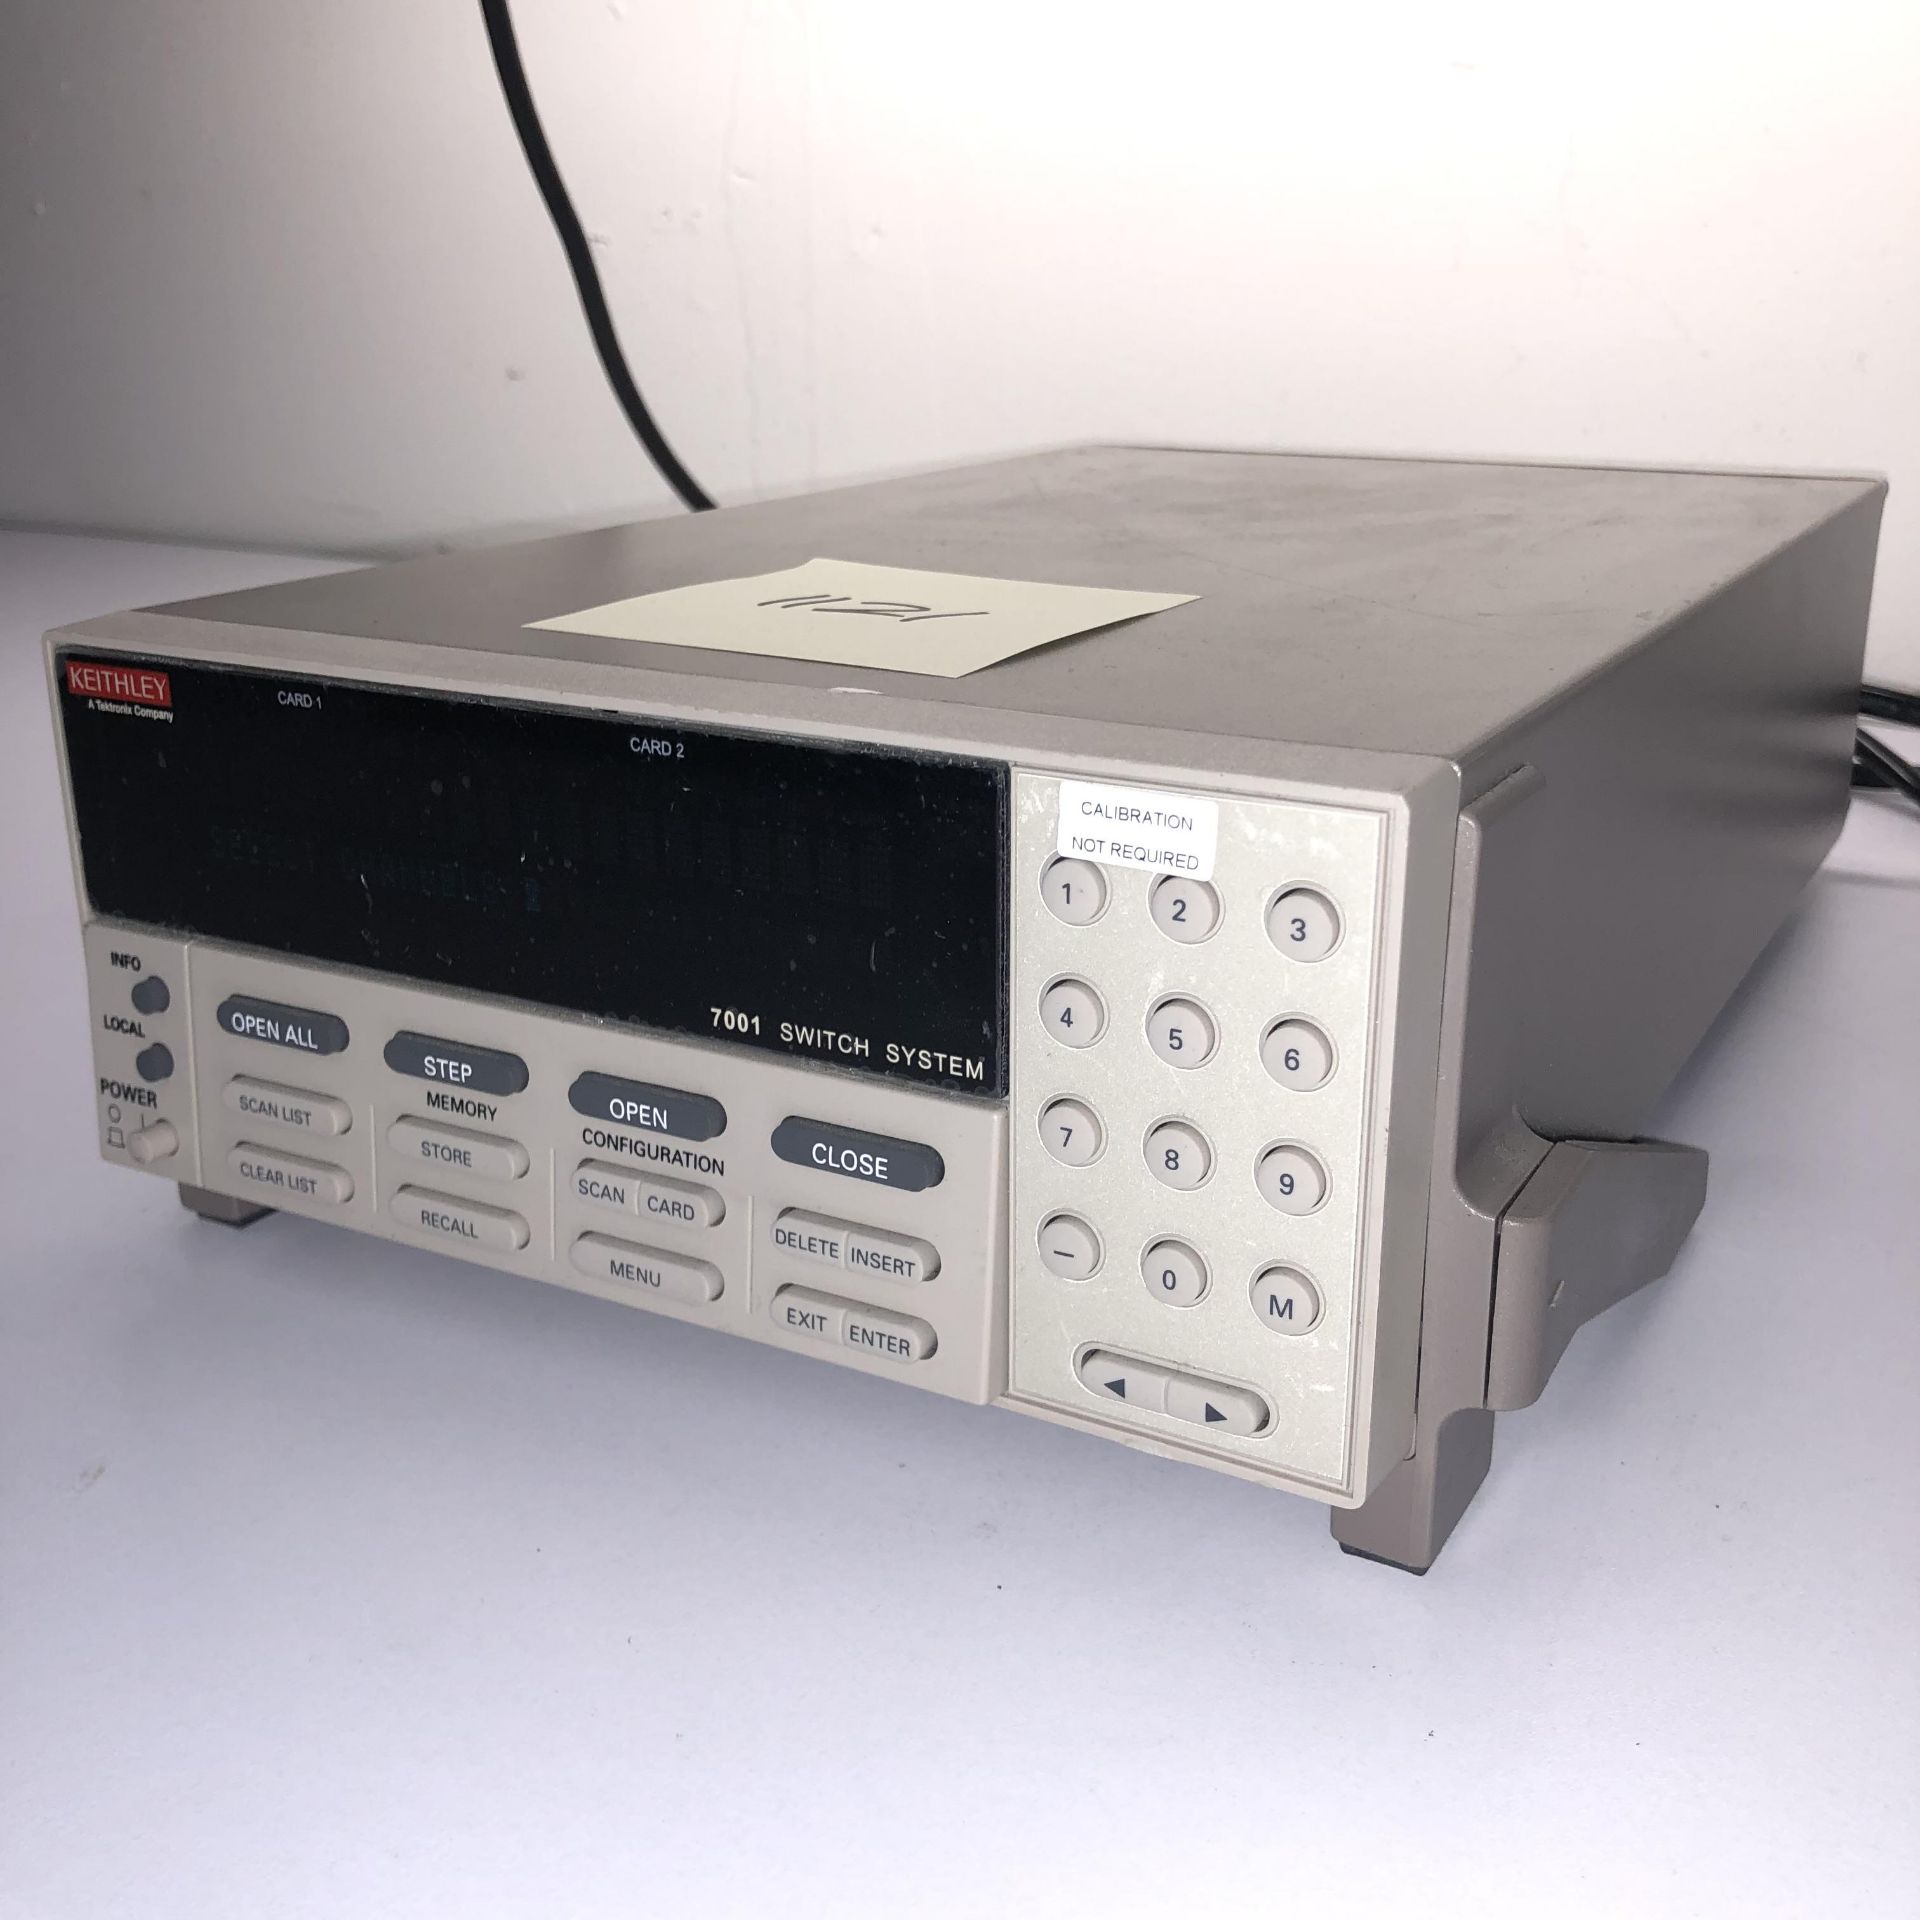 KEITHLEY 7001 SWITCH SYSTEM   1218 Alderwood Ave Sunnyvale, California - Image 3 of 6